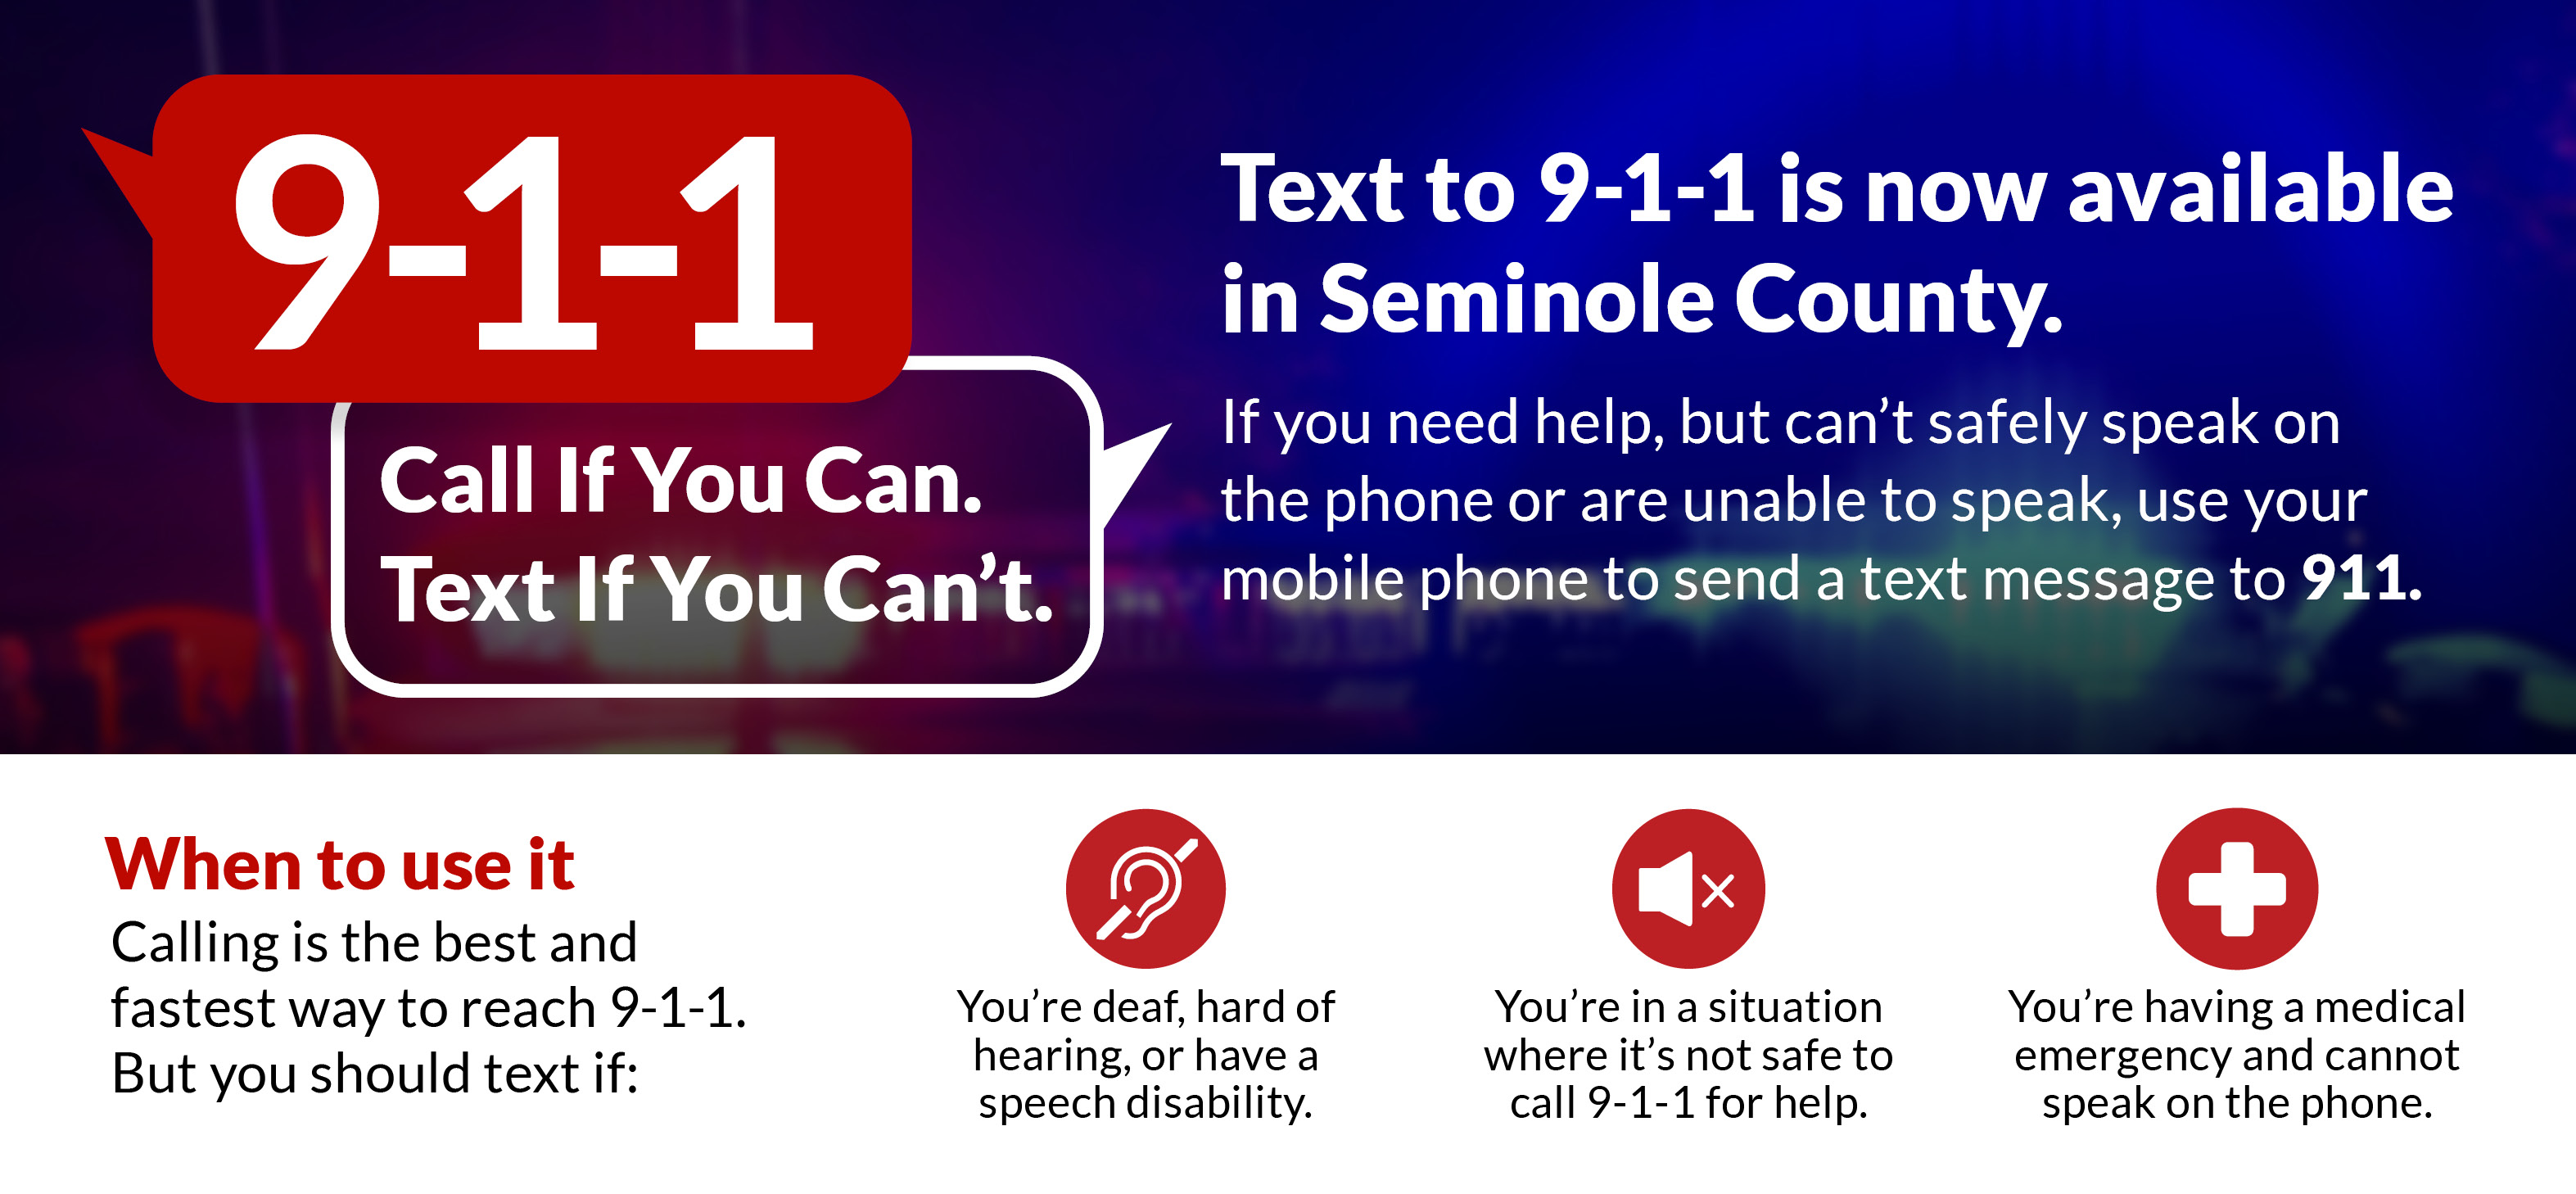 Text-to-911 graphic: Call if you can. Text if you can't.